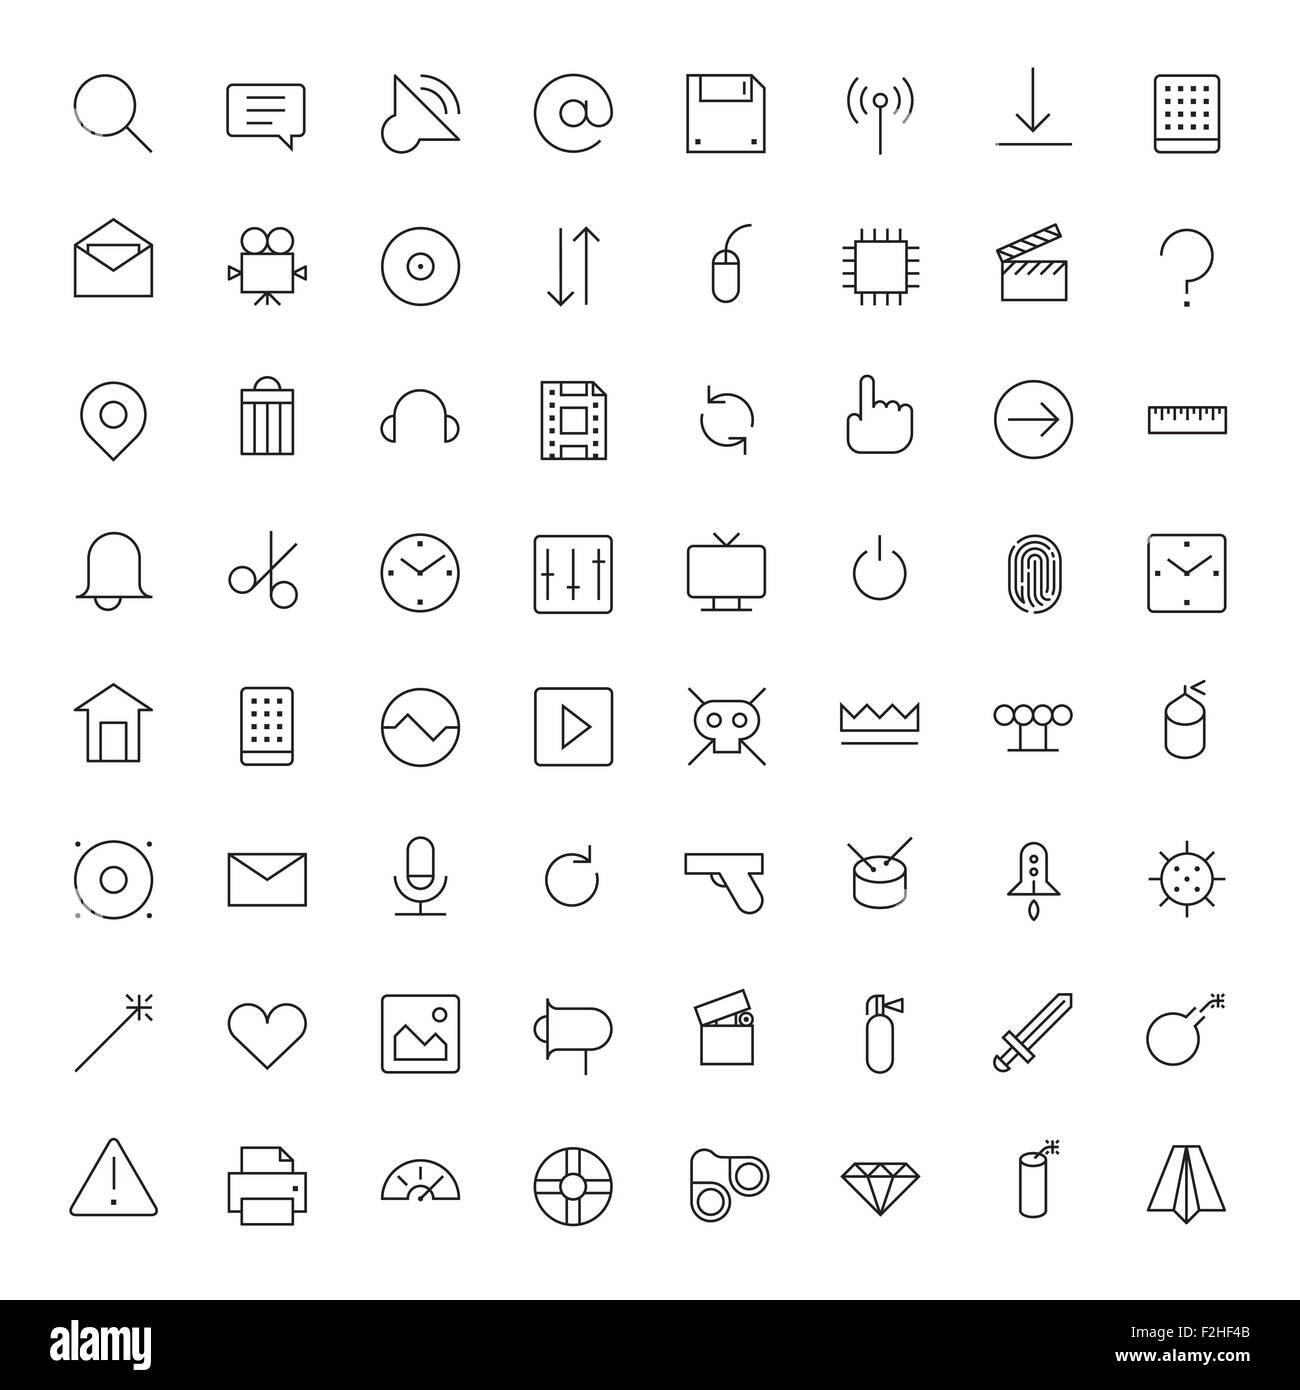 Thin Line Icons For User Interface. Raster version. Stock Photo